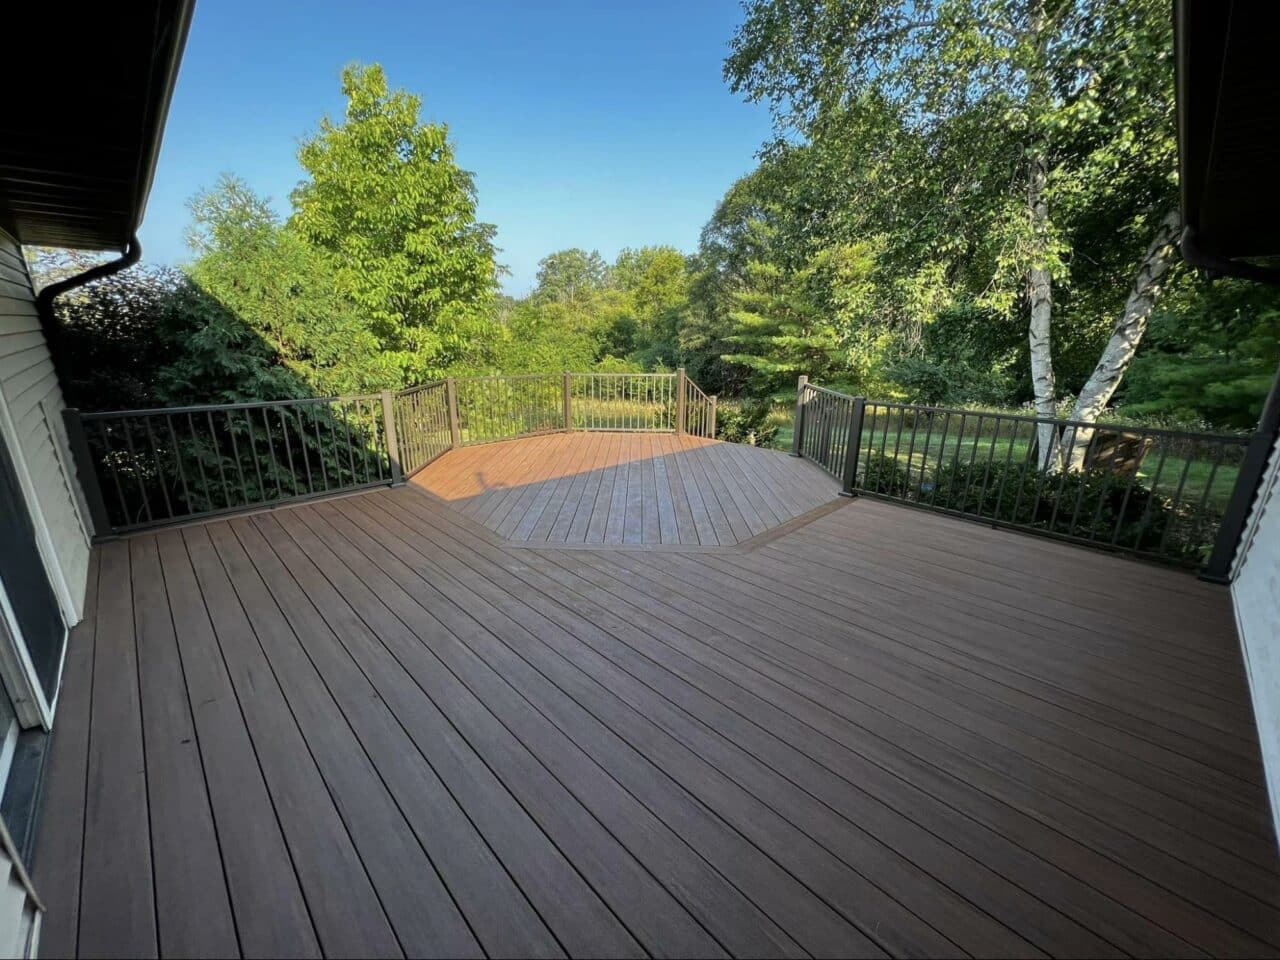 Photo of Composite Deck Boards with Black Railing